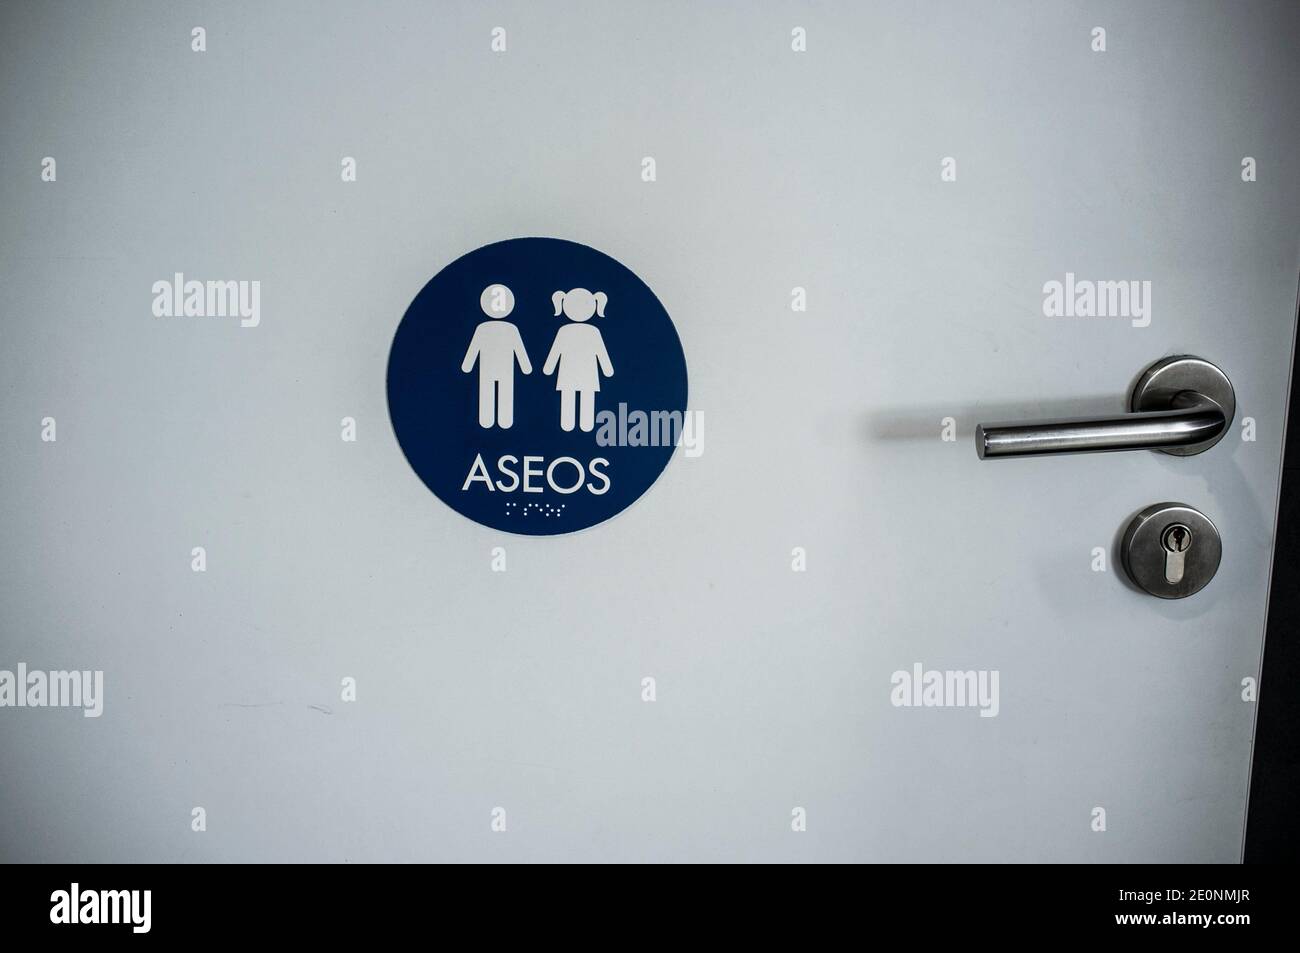 Door decal for children toilet. Sticker placed at eye-level with text caption in braille language. Stock Photo